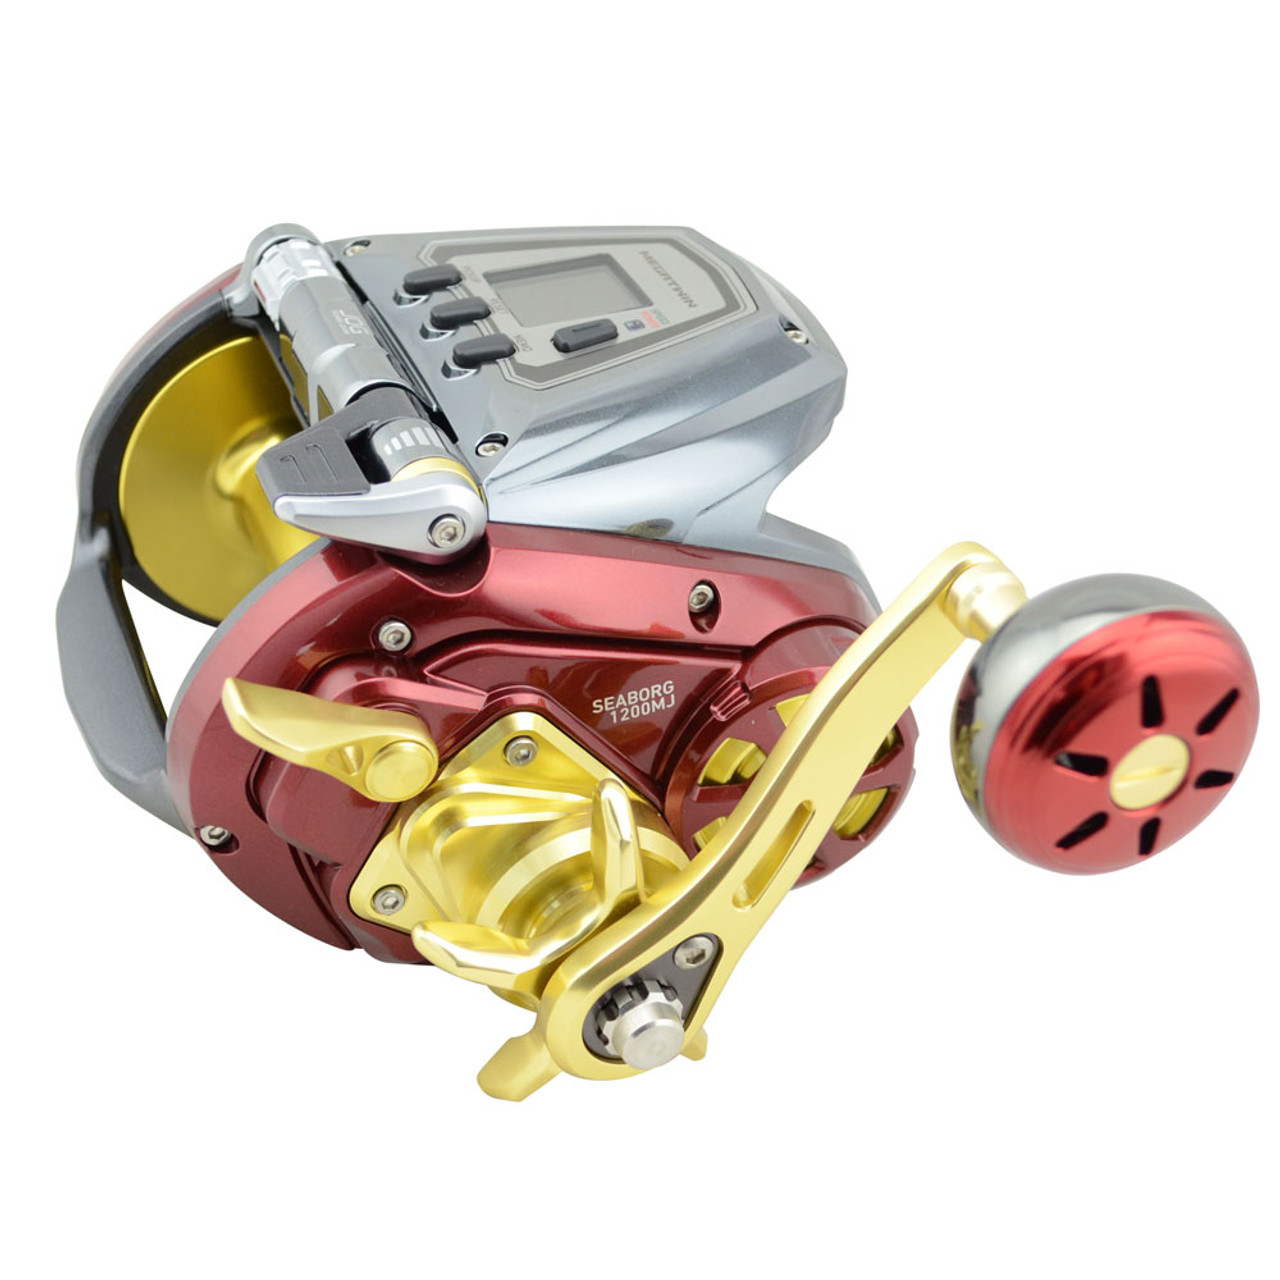 Sale online  Opening Sales Daiwa Seaborg Megatwin Electric Reel color  variants at